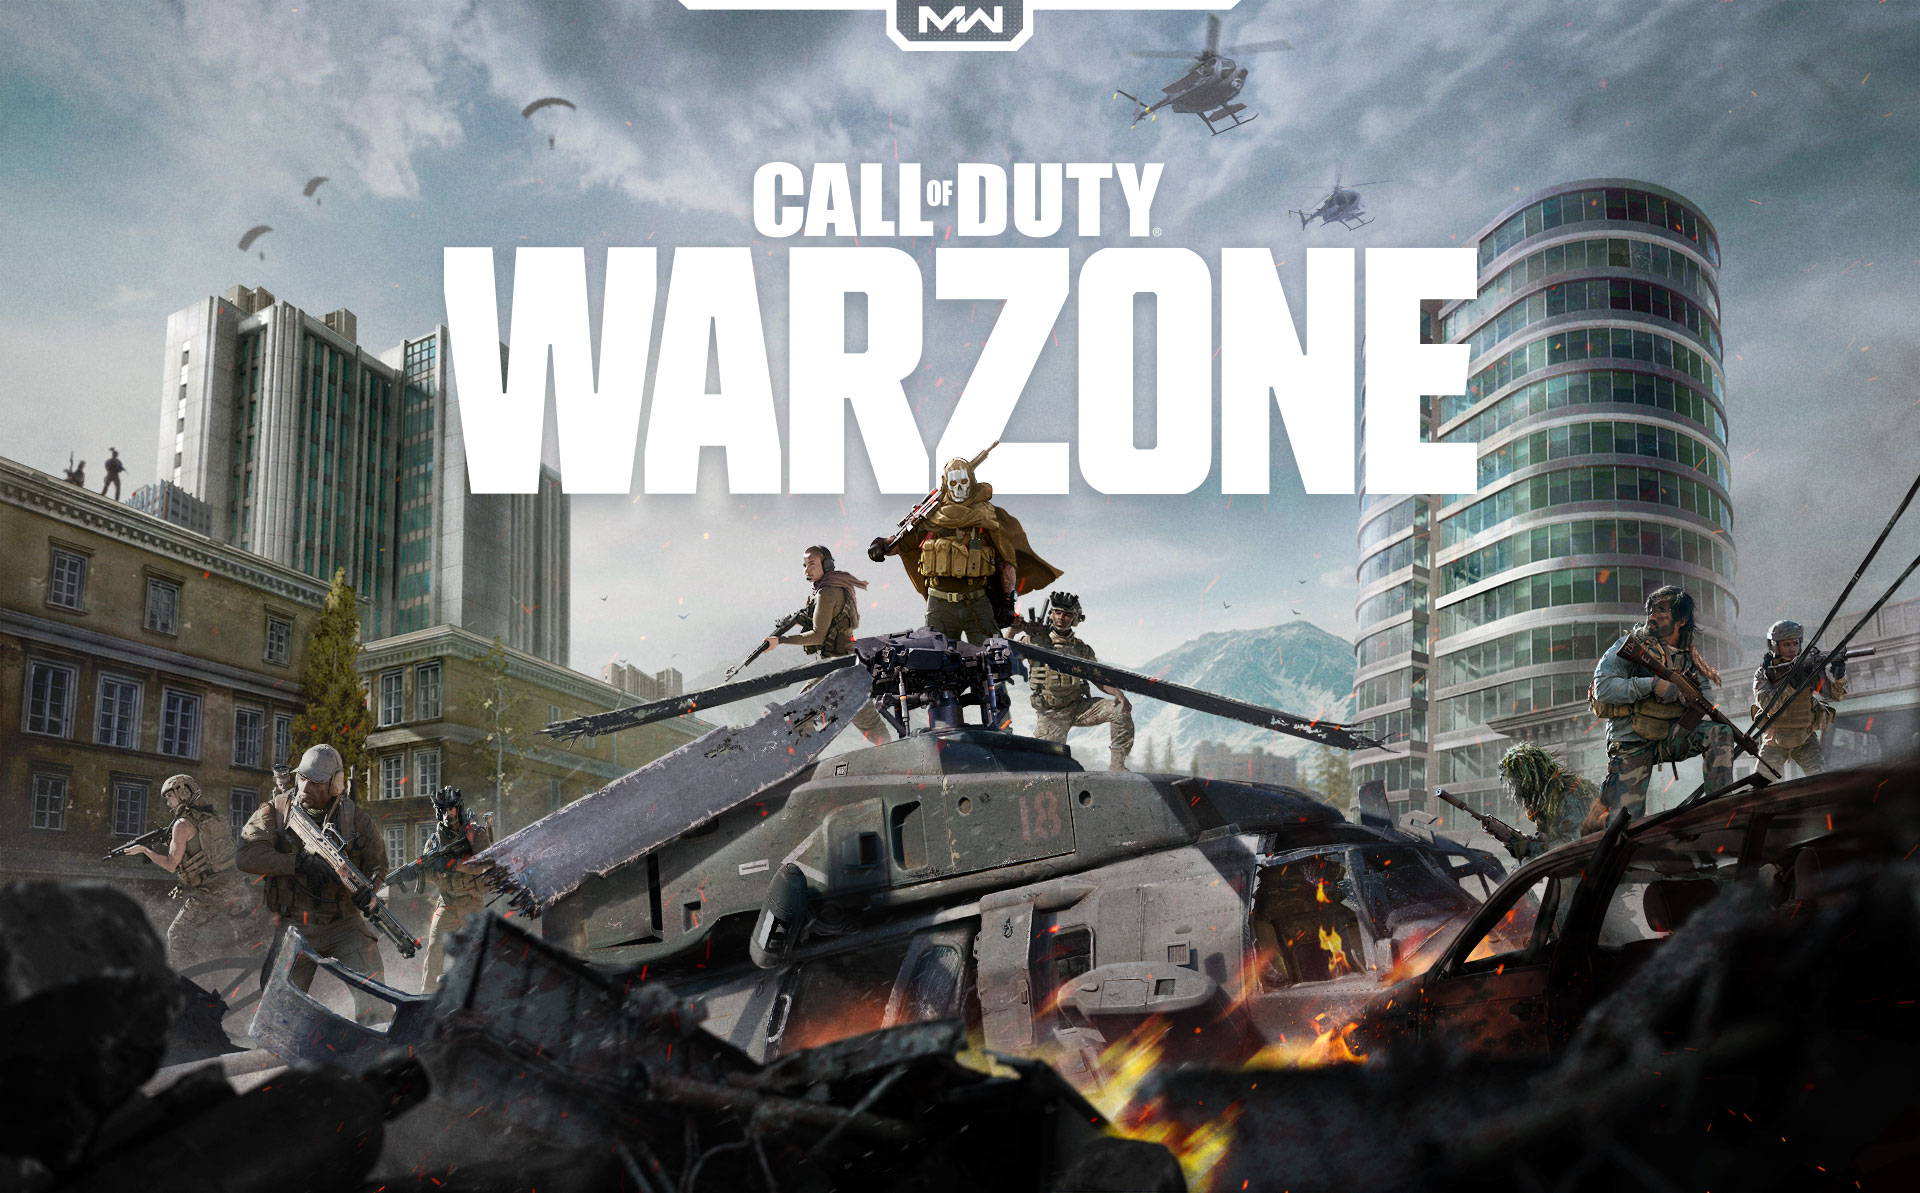 CALL OF DUTY WARZONE game wallpaper